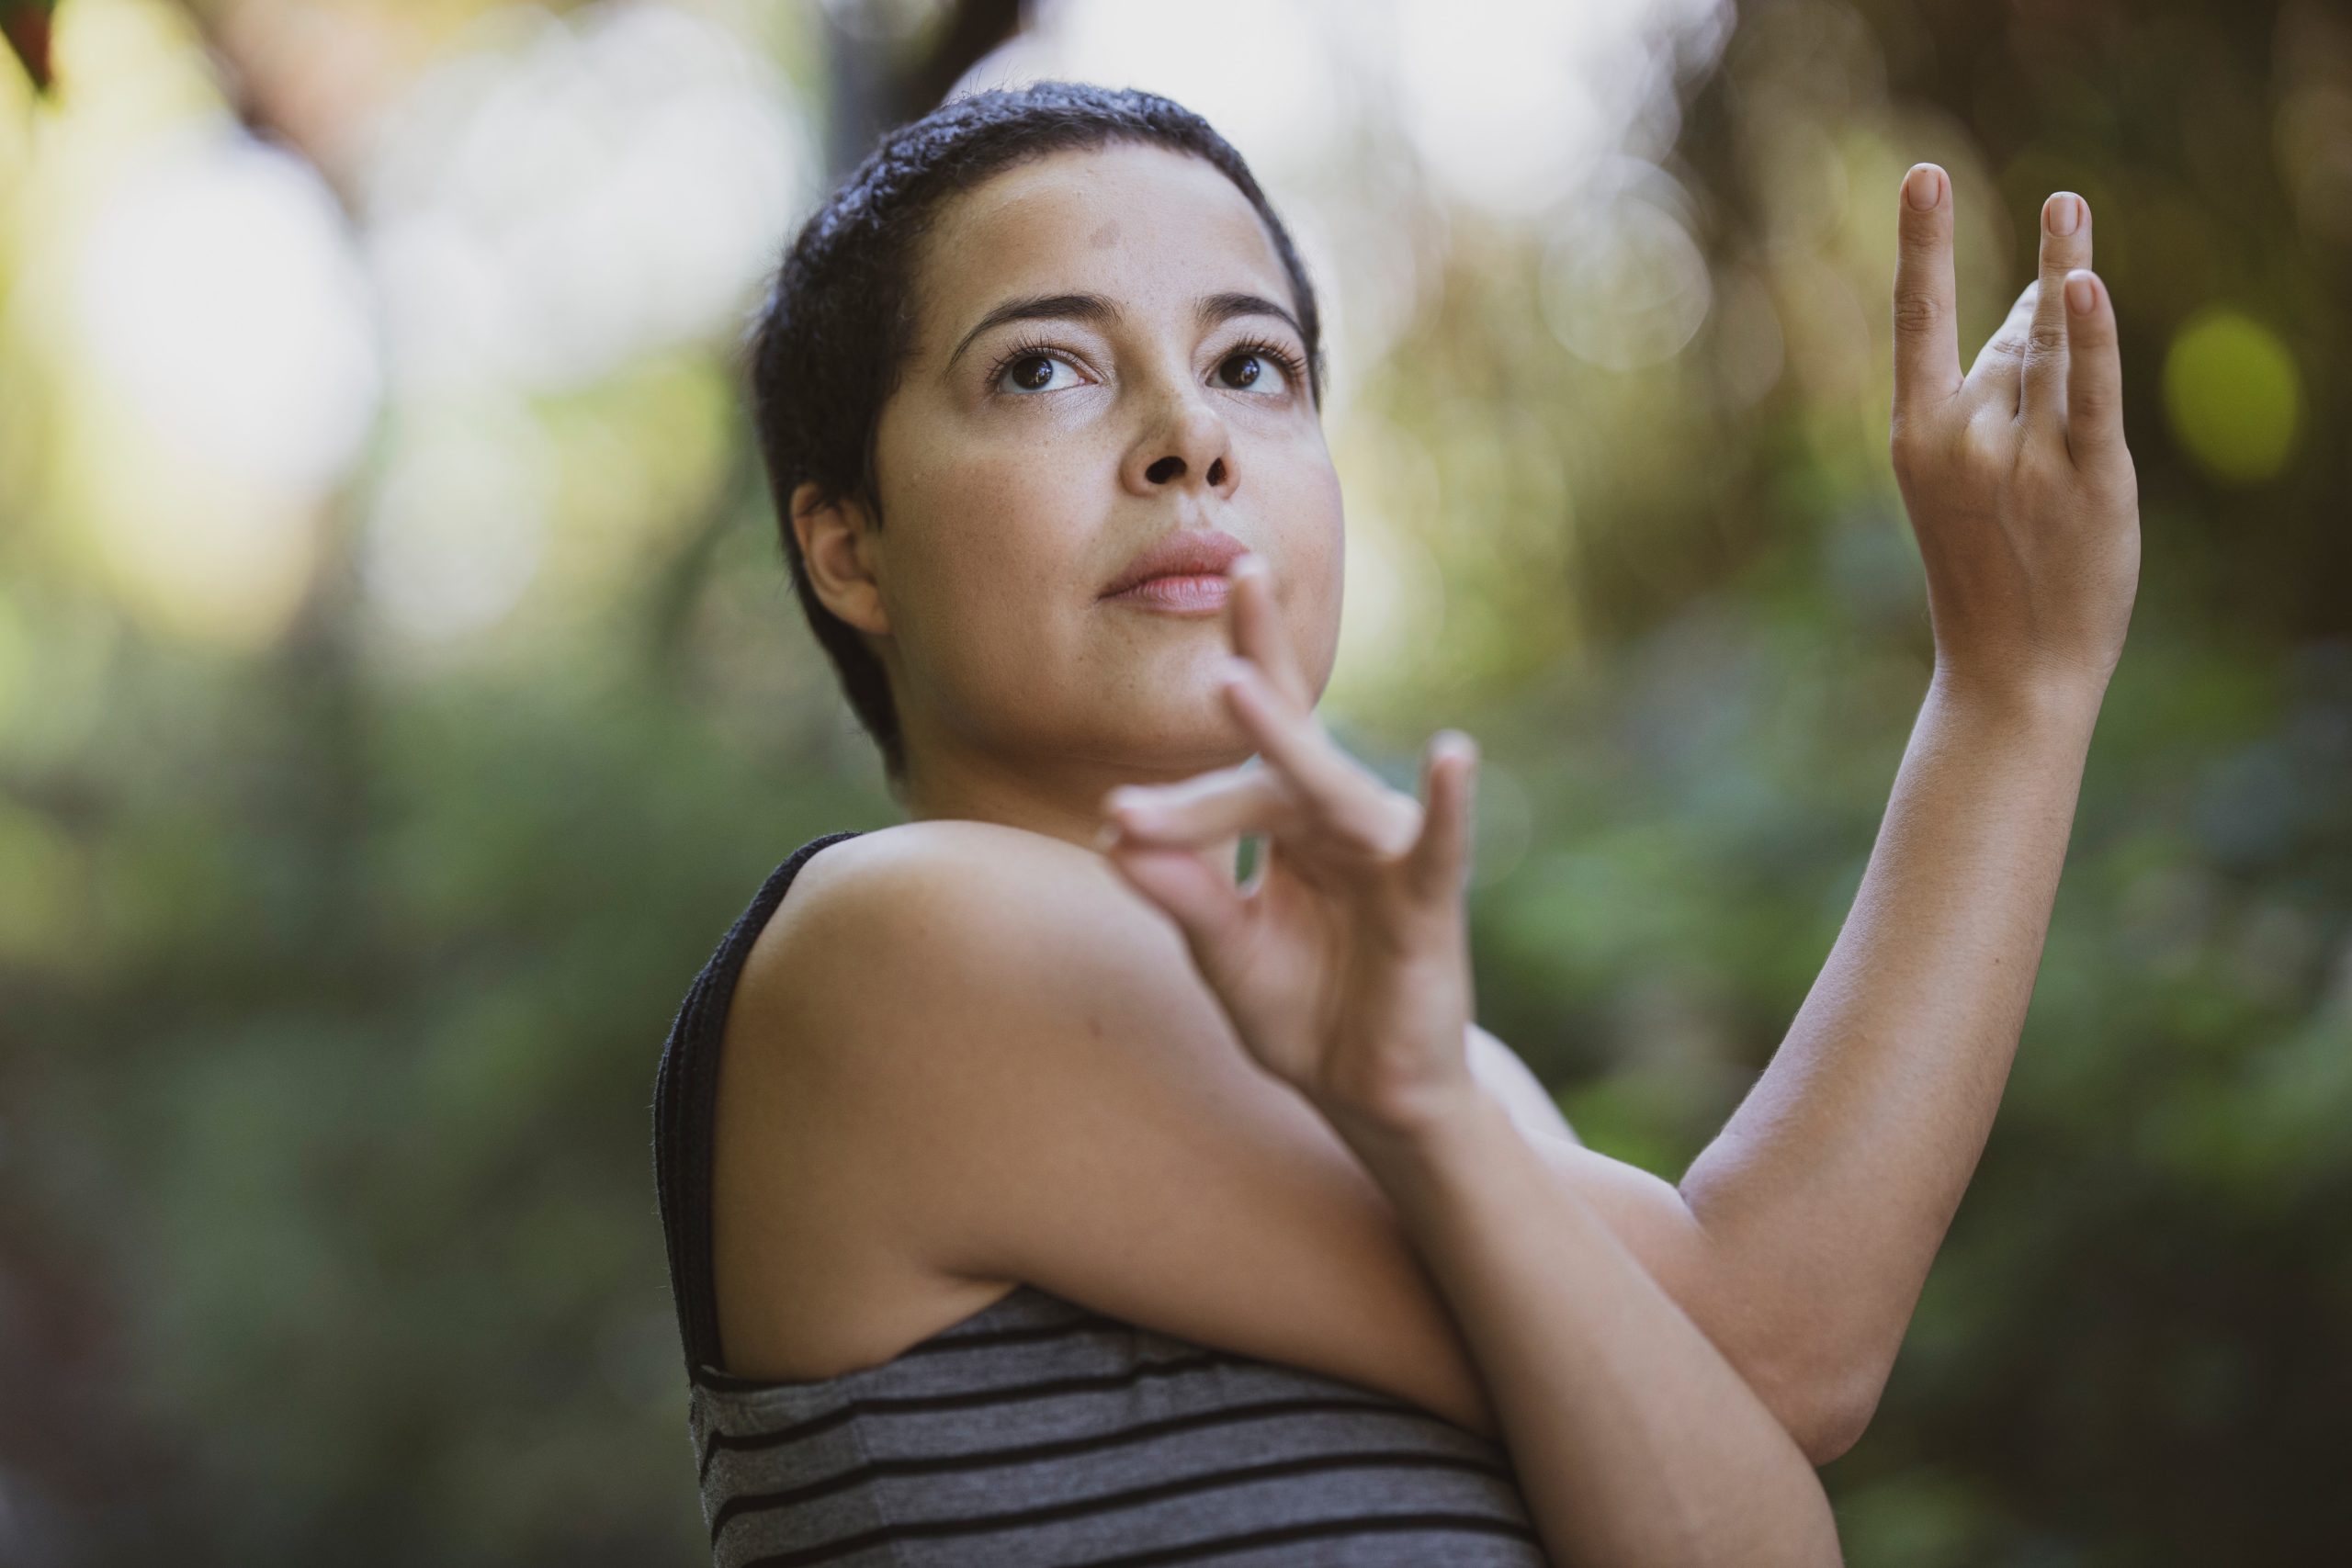 A woman meditating with poised hands.